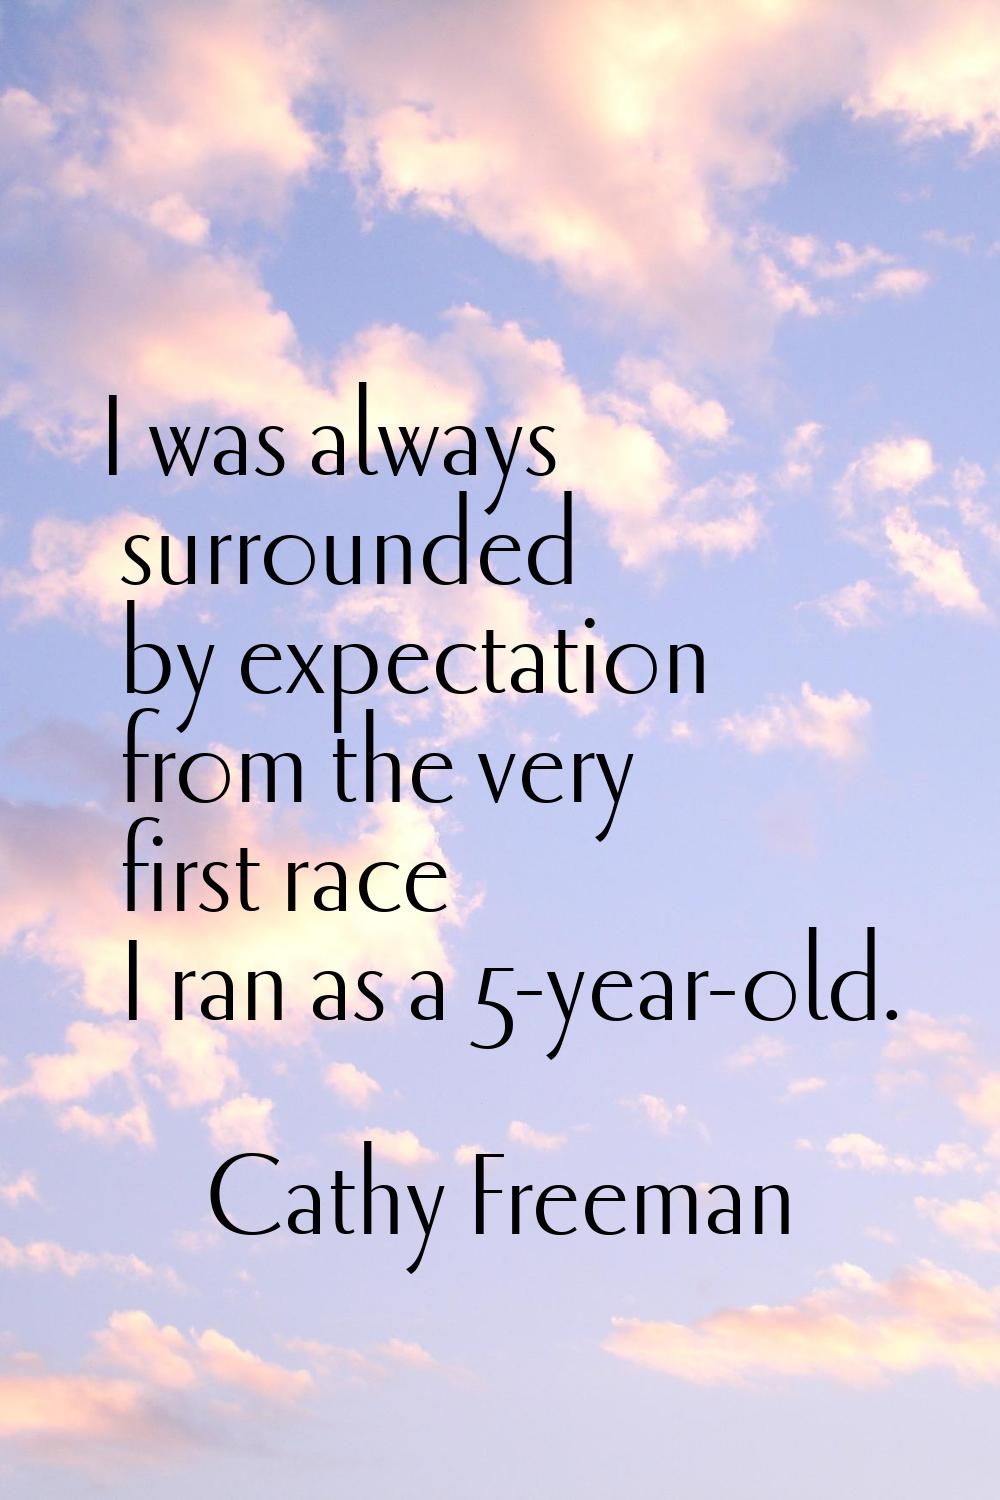 I was always surrounded by expectation from the very first race I ran as a 5-year-old.